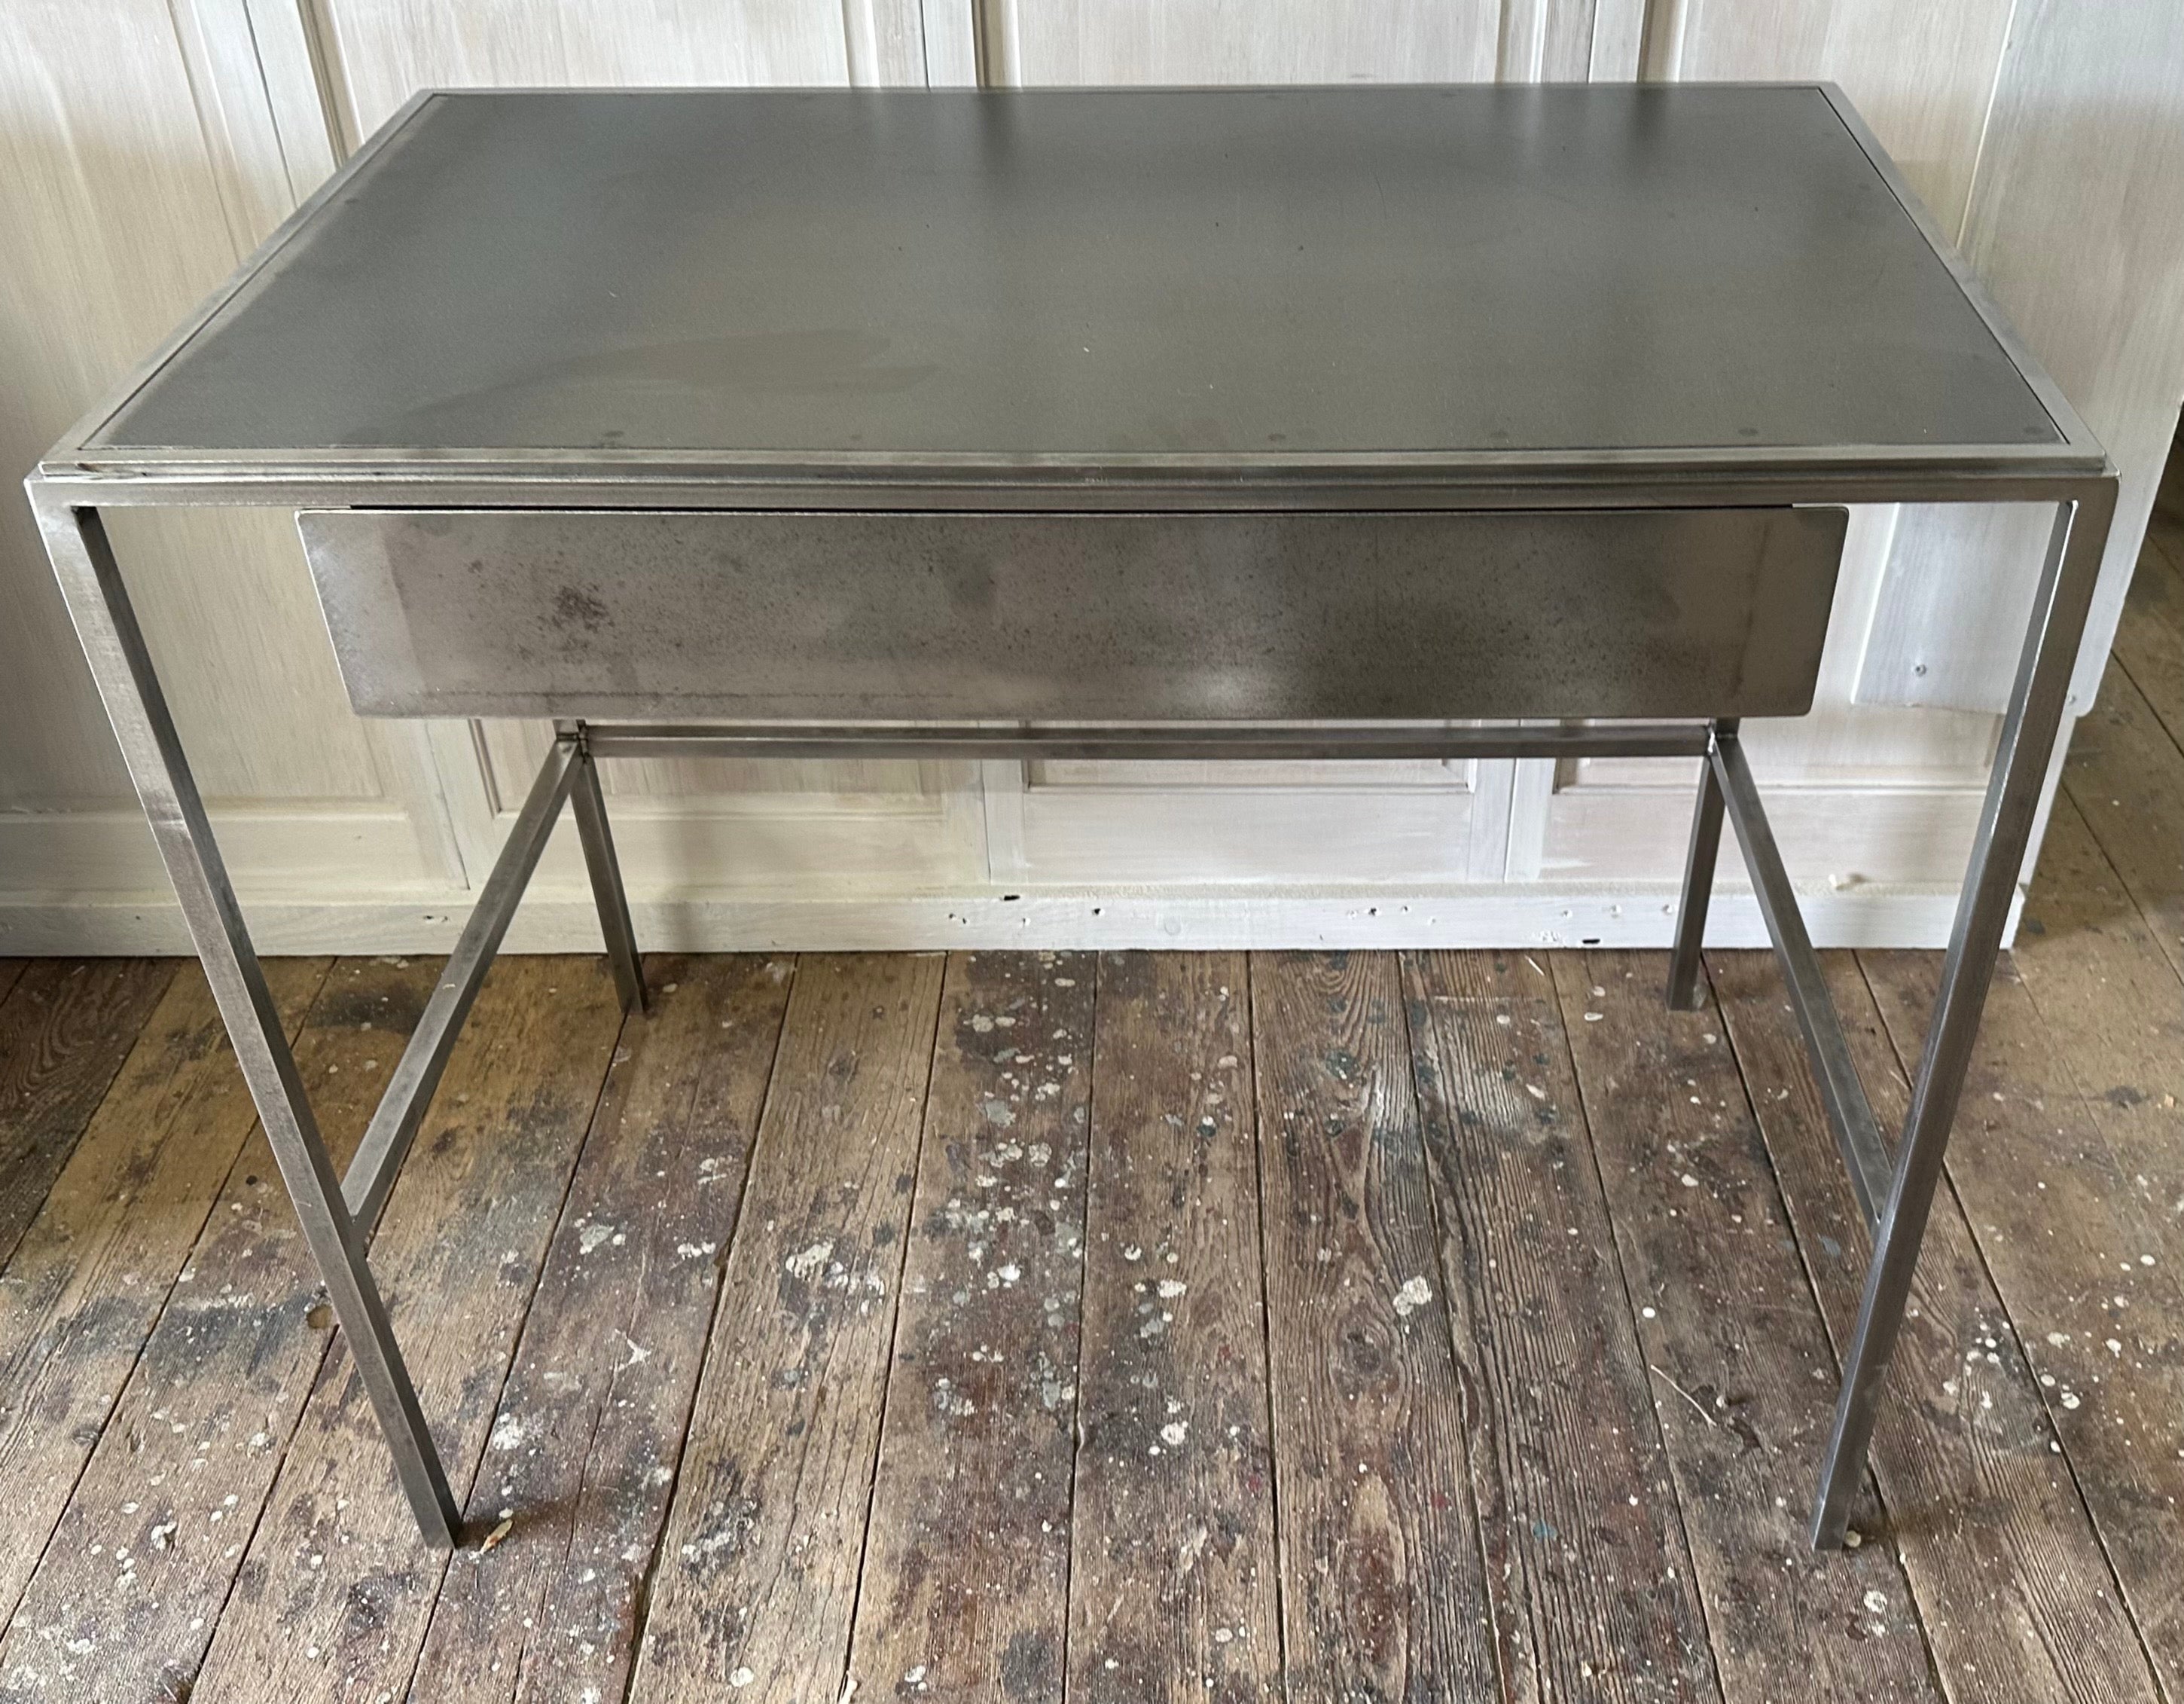 Custom made and designed by us. this versatile modern and traditional styled piece can be used as end table, vanity, desk or dressing table. Table has distressed metal top insert and a drawer. Matching vanity stool available. Can work well in